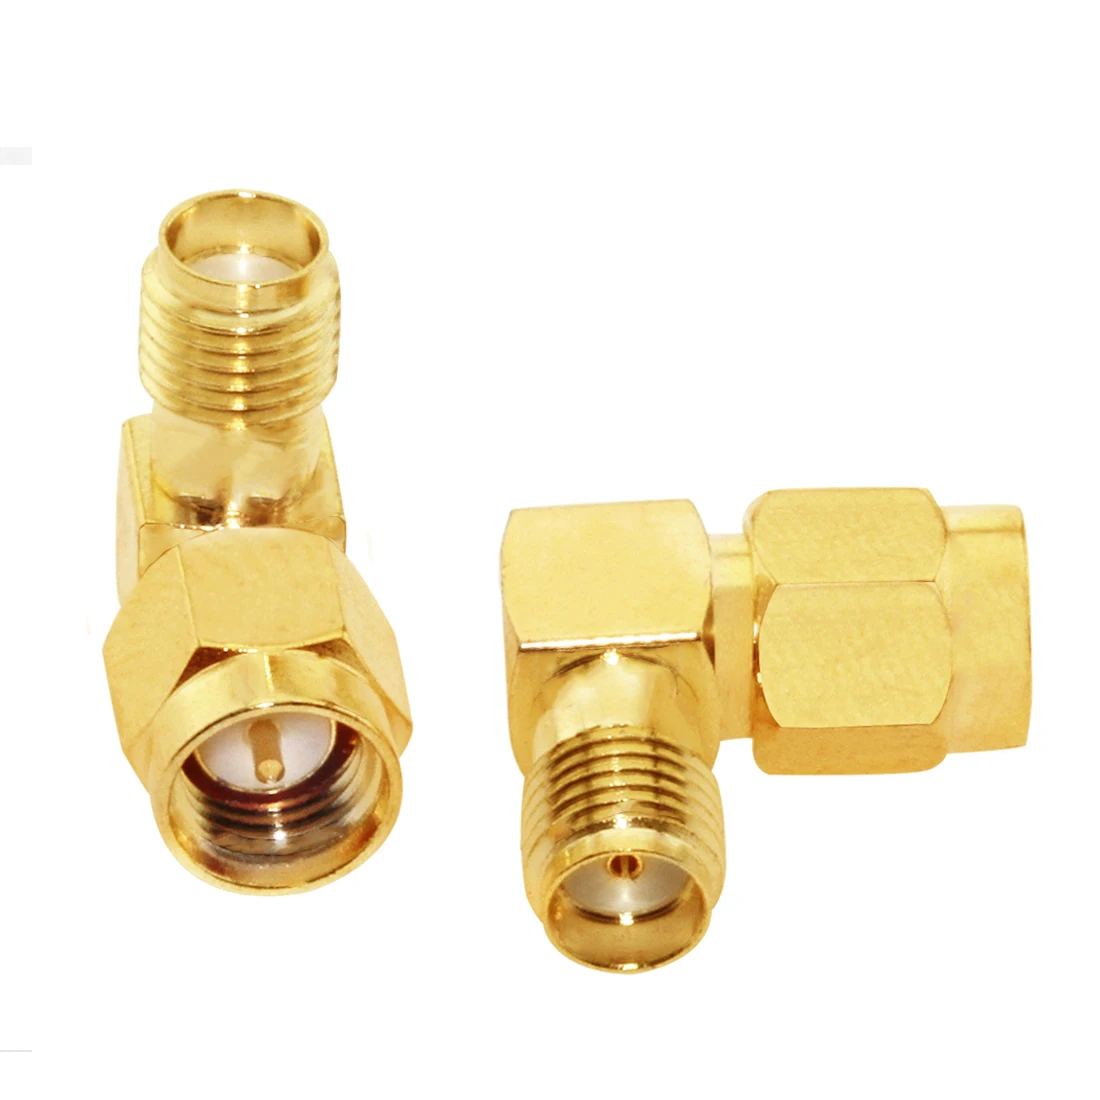 1pc SMA Male Plug to Female Jack  RF Coax Adapter Modem Convertor Connector Right  Angle Goldplated NEW Wholesale 6 35 6 5mm 2core elbow right angle guitar effect pedal connector mono amplifier microphone jack plug diy welding audio plug